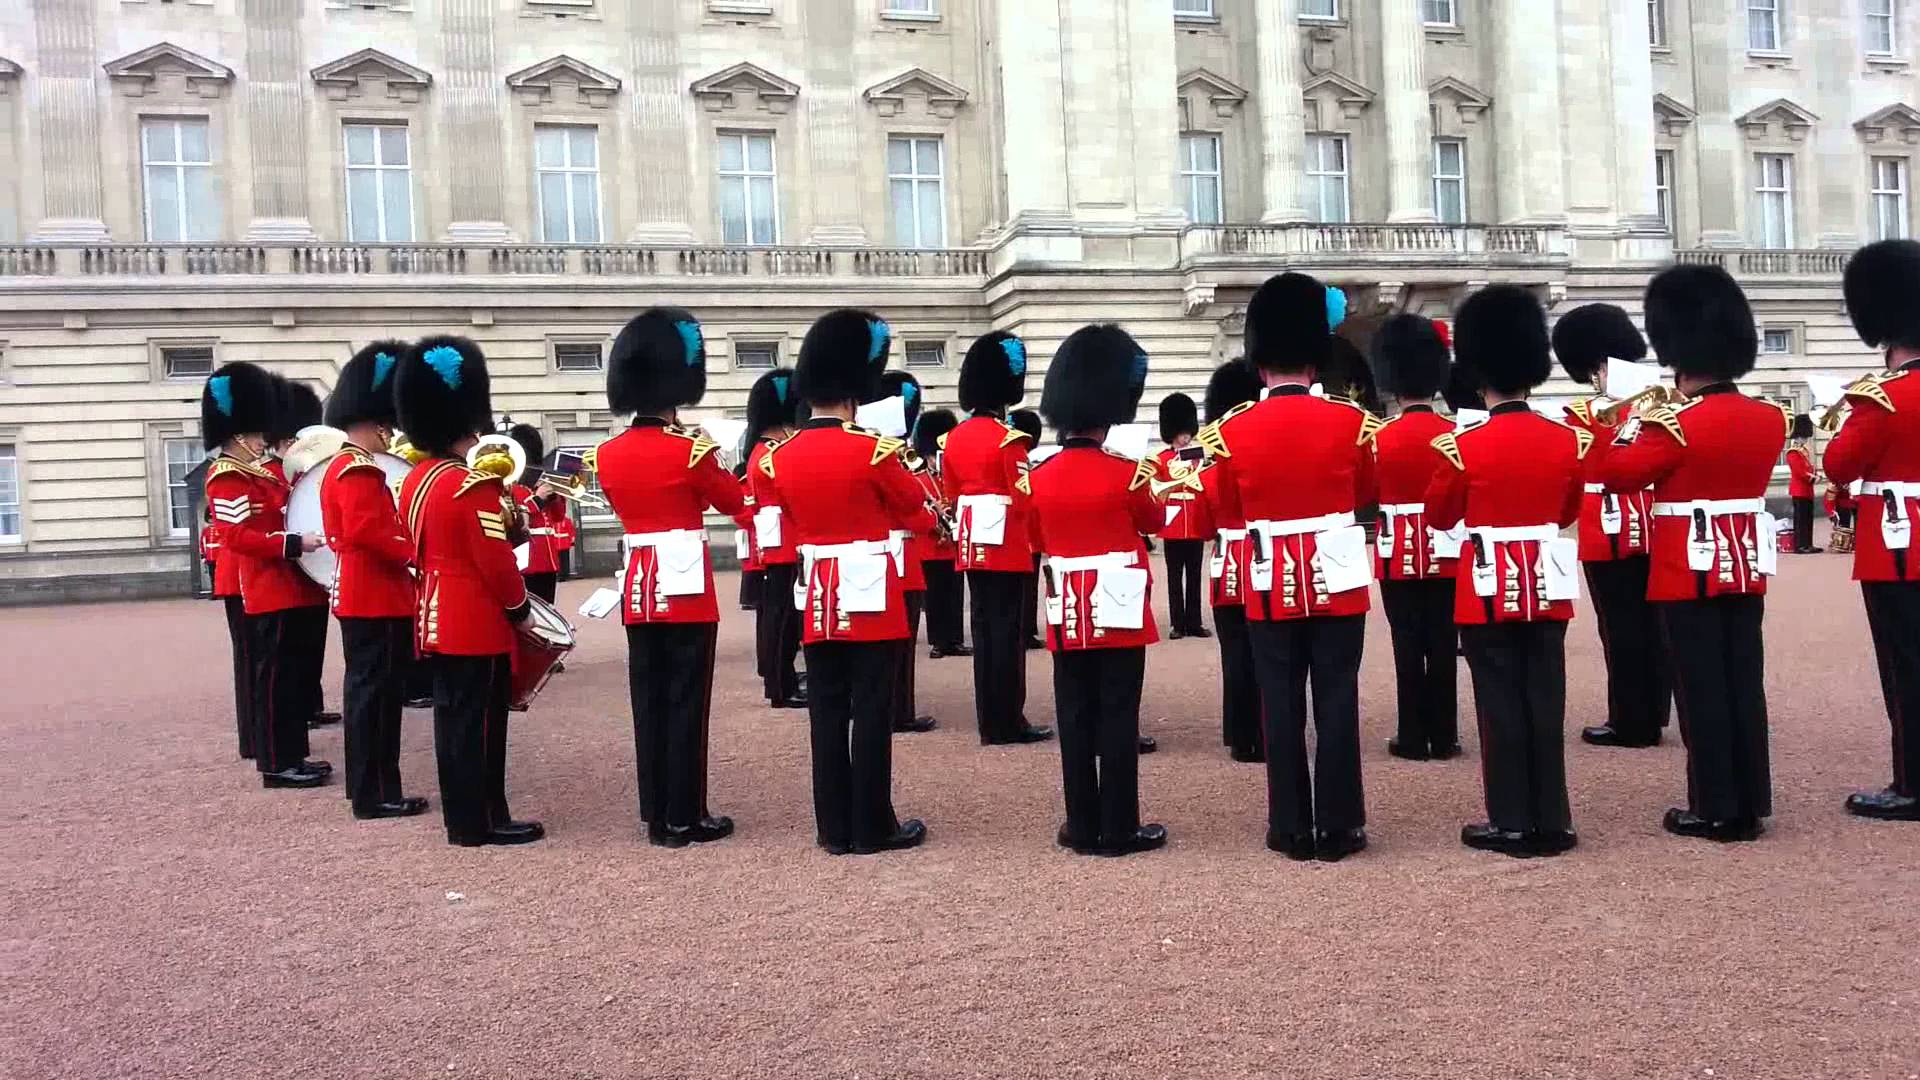 The real ‘queen’s guard’ wows with game of thrones performance